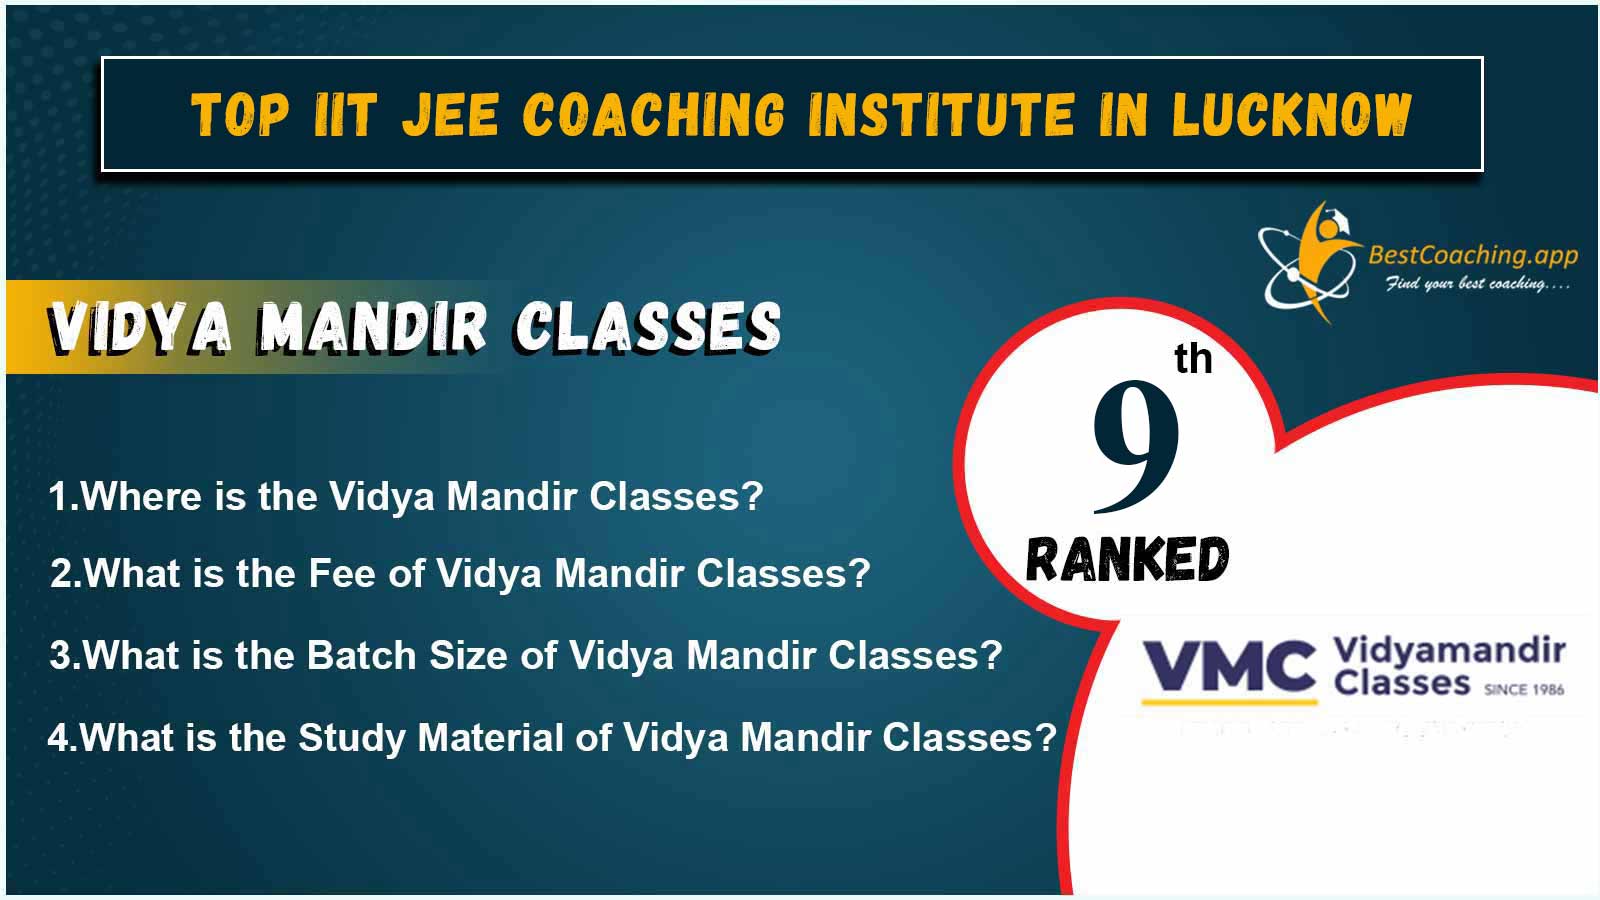 Top IIT JEE Coaching in Lucknow